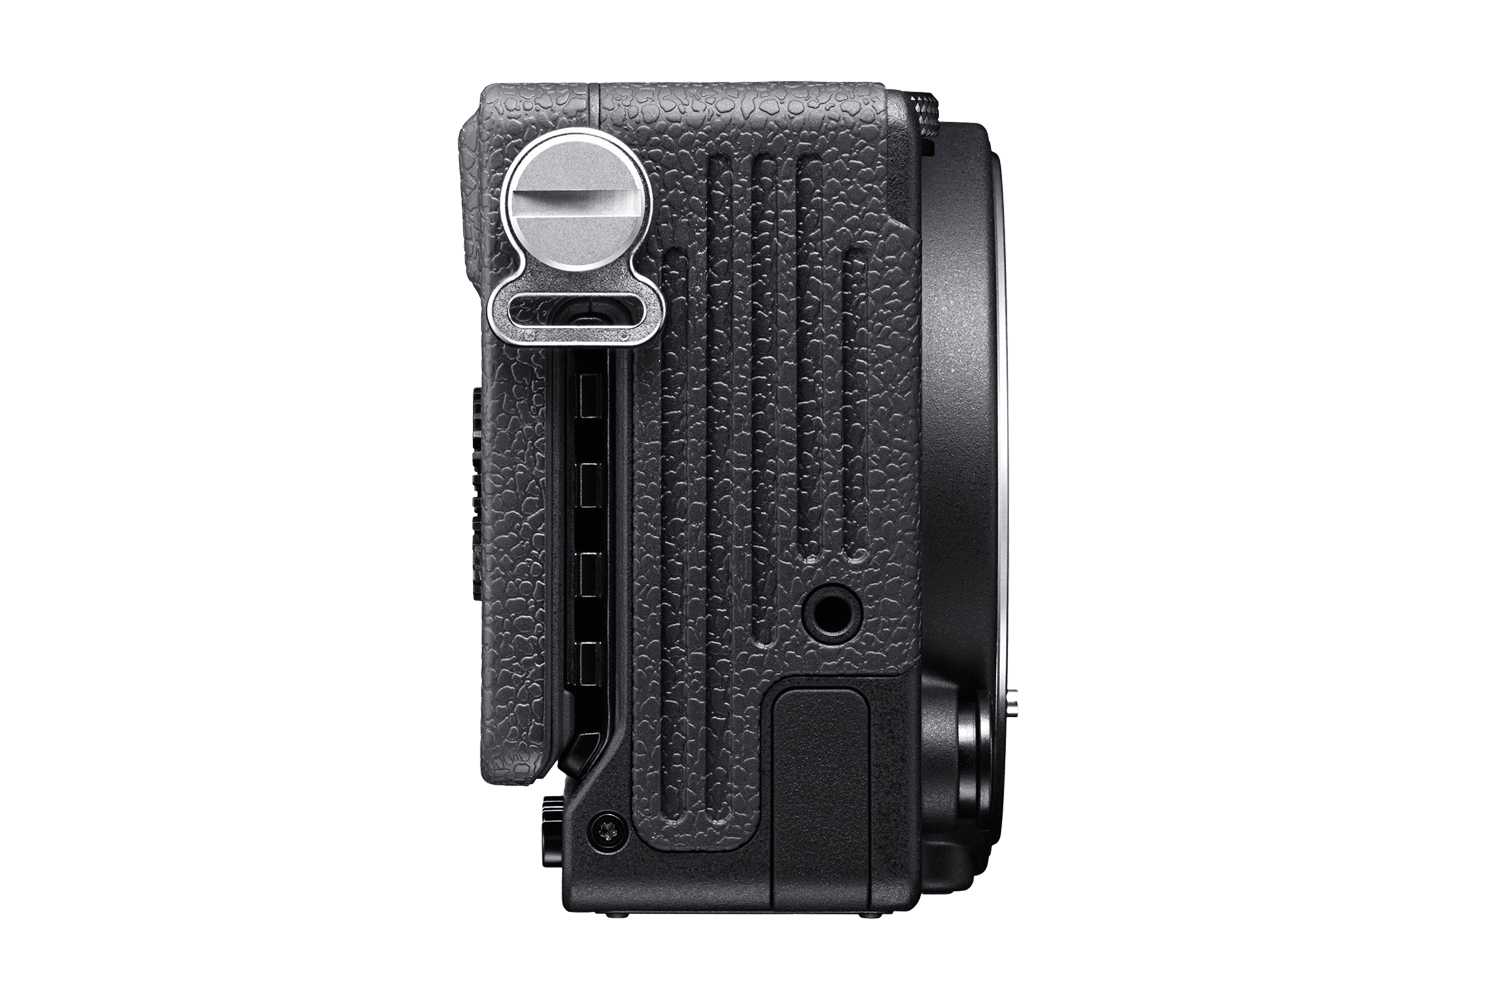 sigma fp worlds smallest full frame mirrorless camera news right side